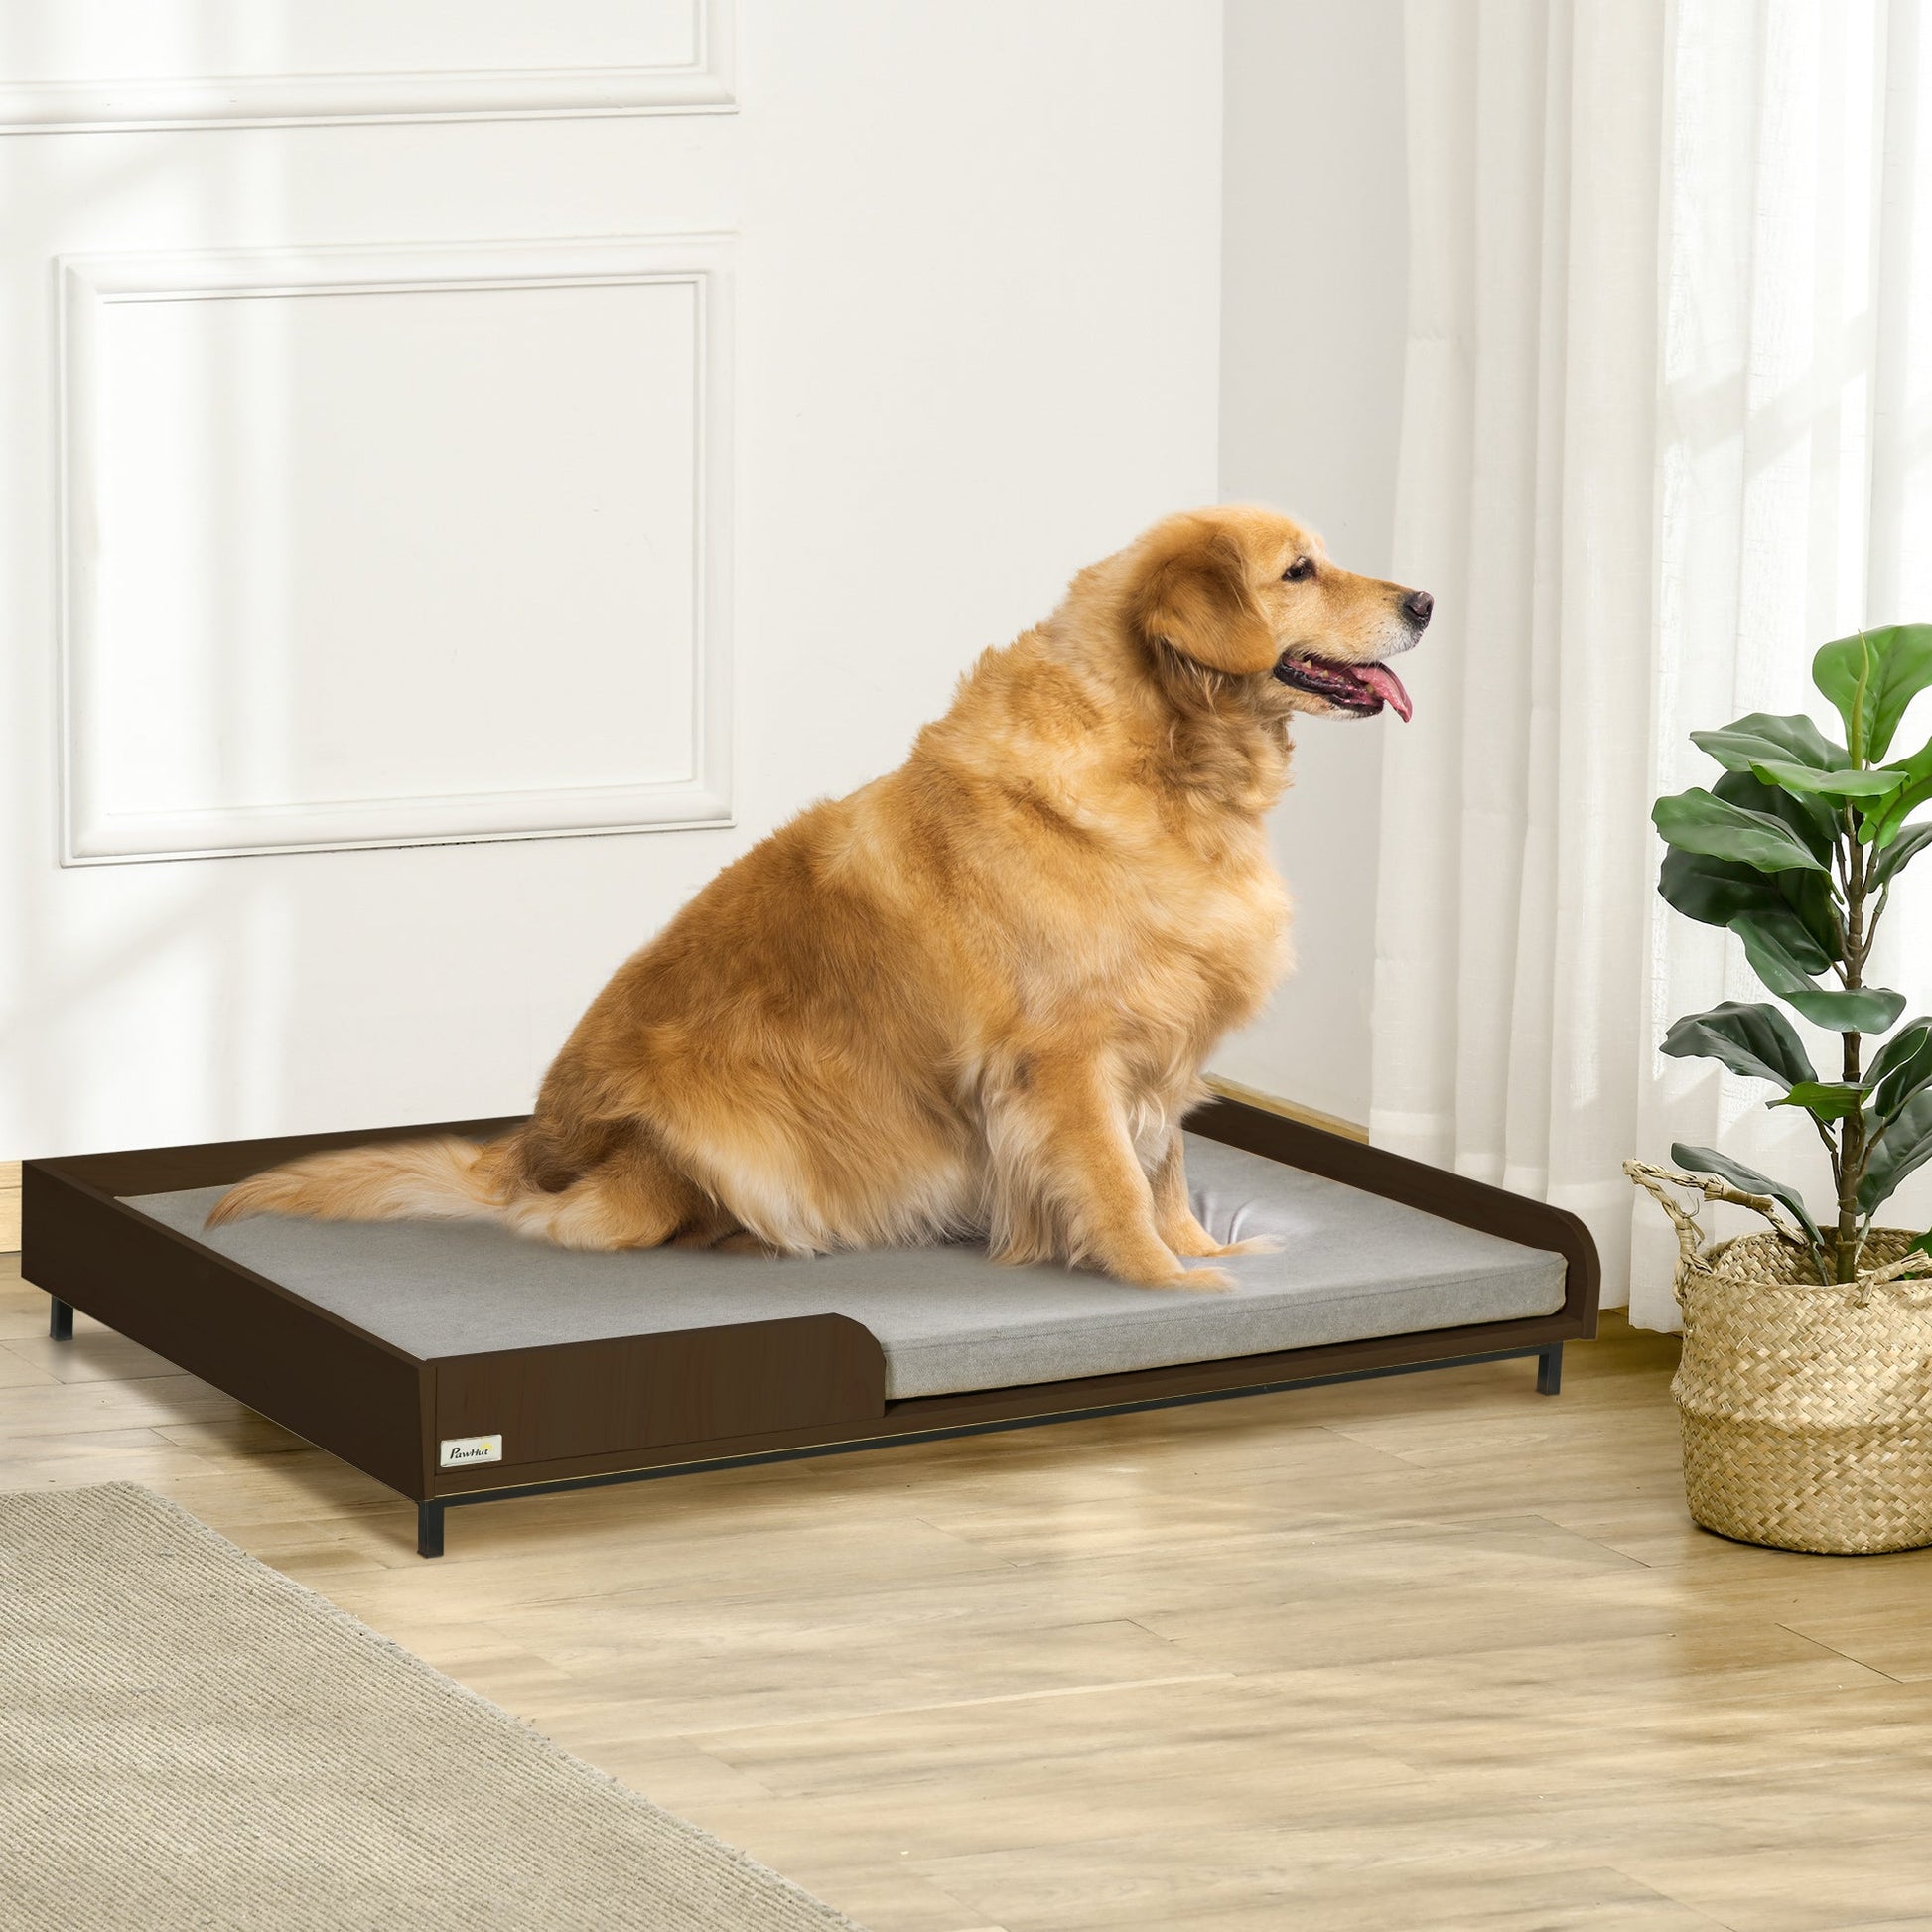 Elevated Dog Bed Frame, Furniture Style Pet Sofa, Modern Portable Cat Lounge, with Soft Cushion, Washable Cover, Steel Legs, for Large Dog, Brown - Gallery Canada